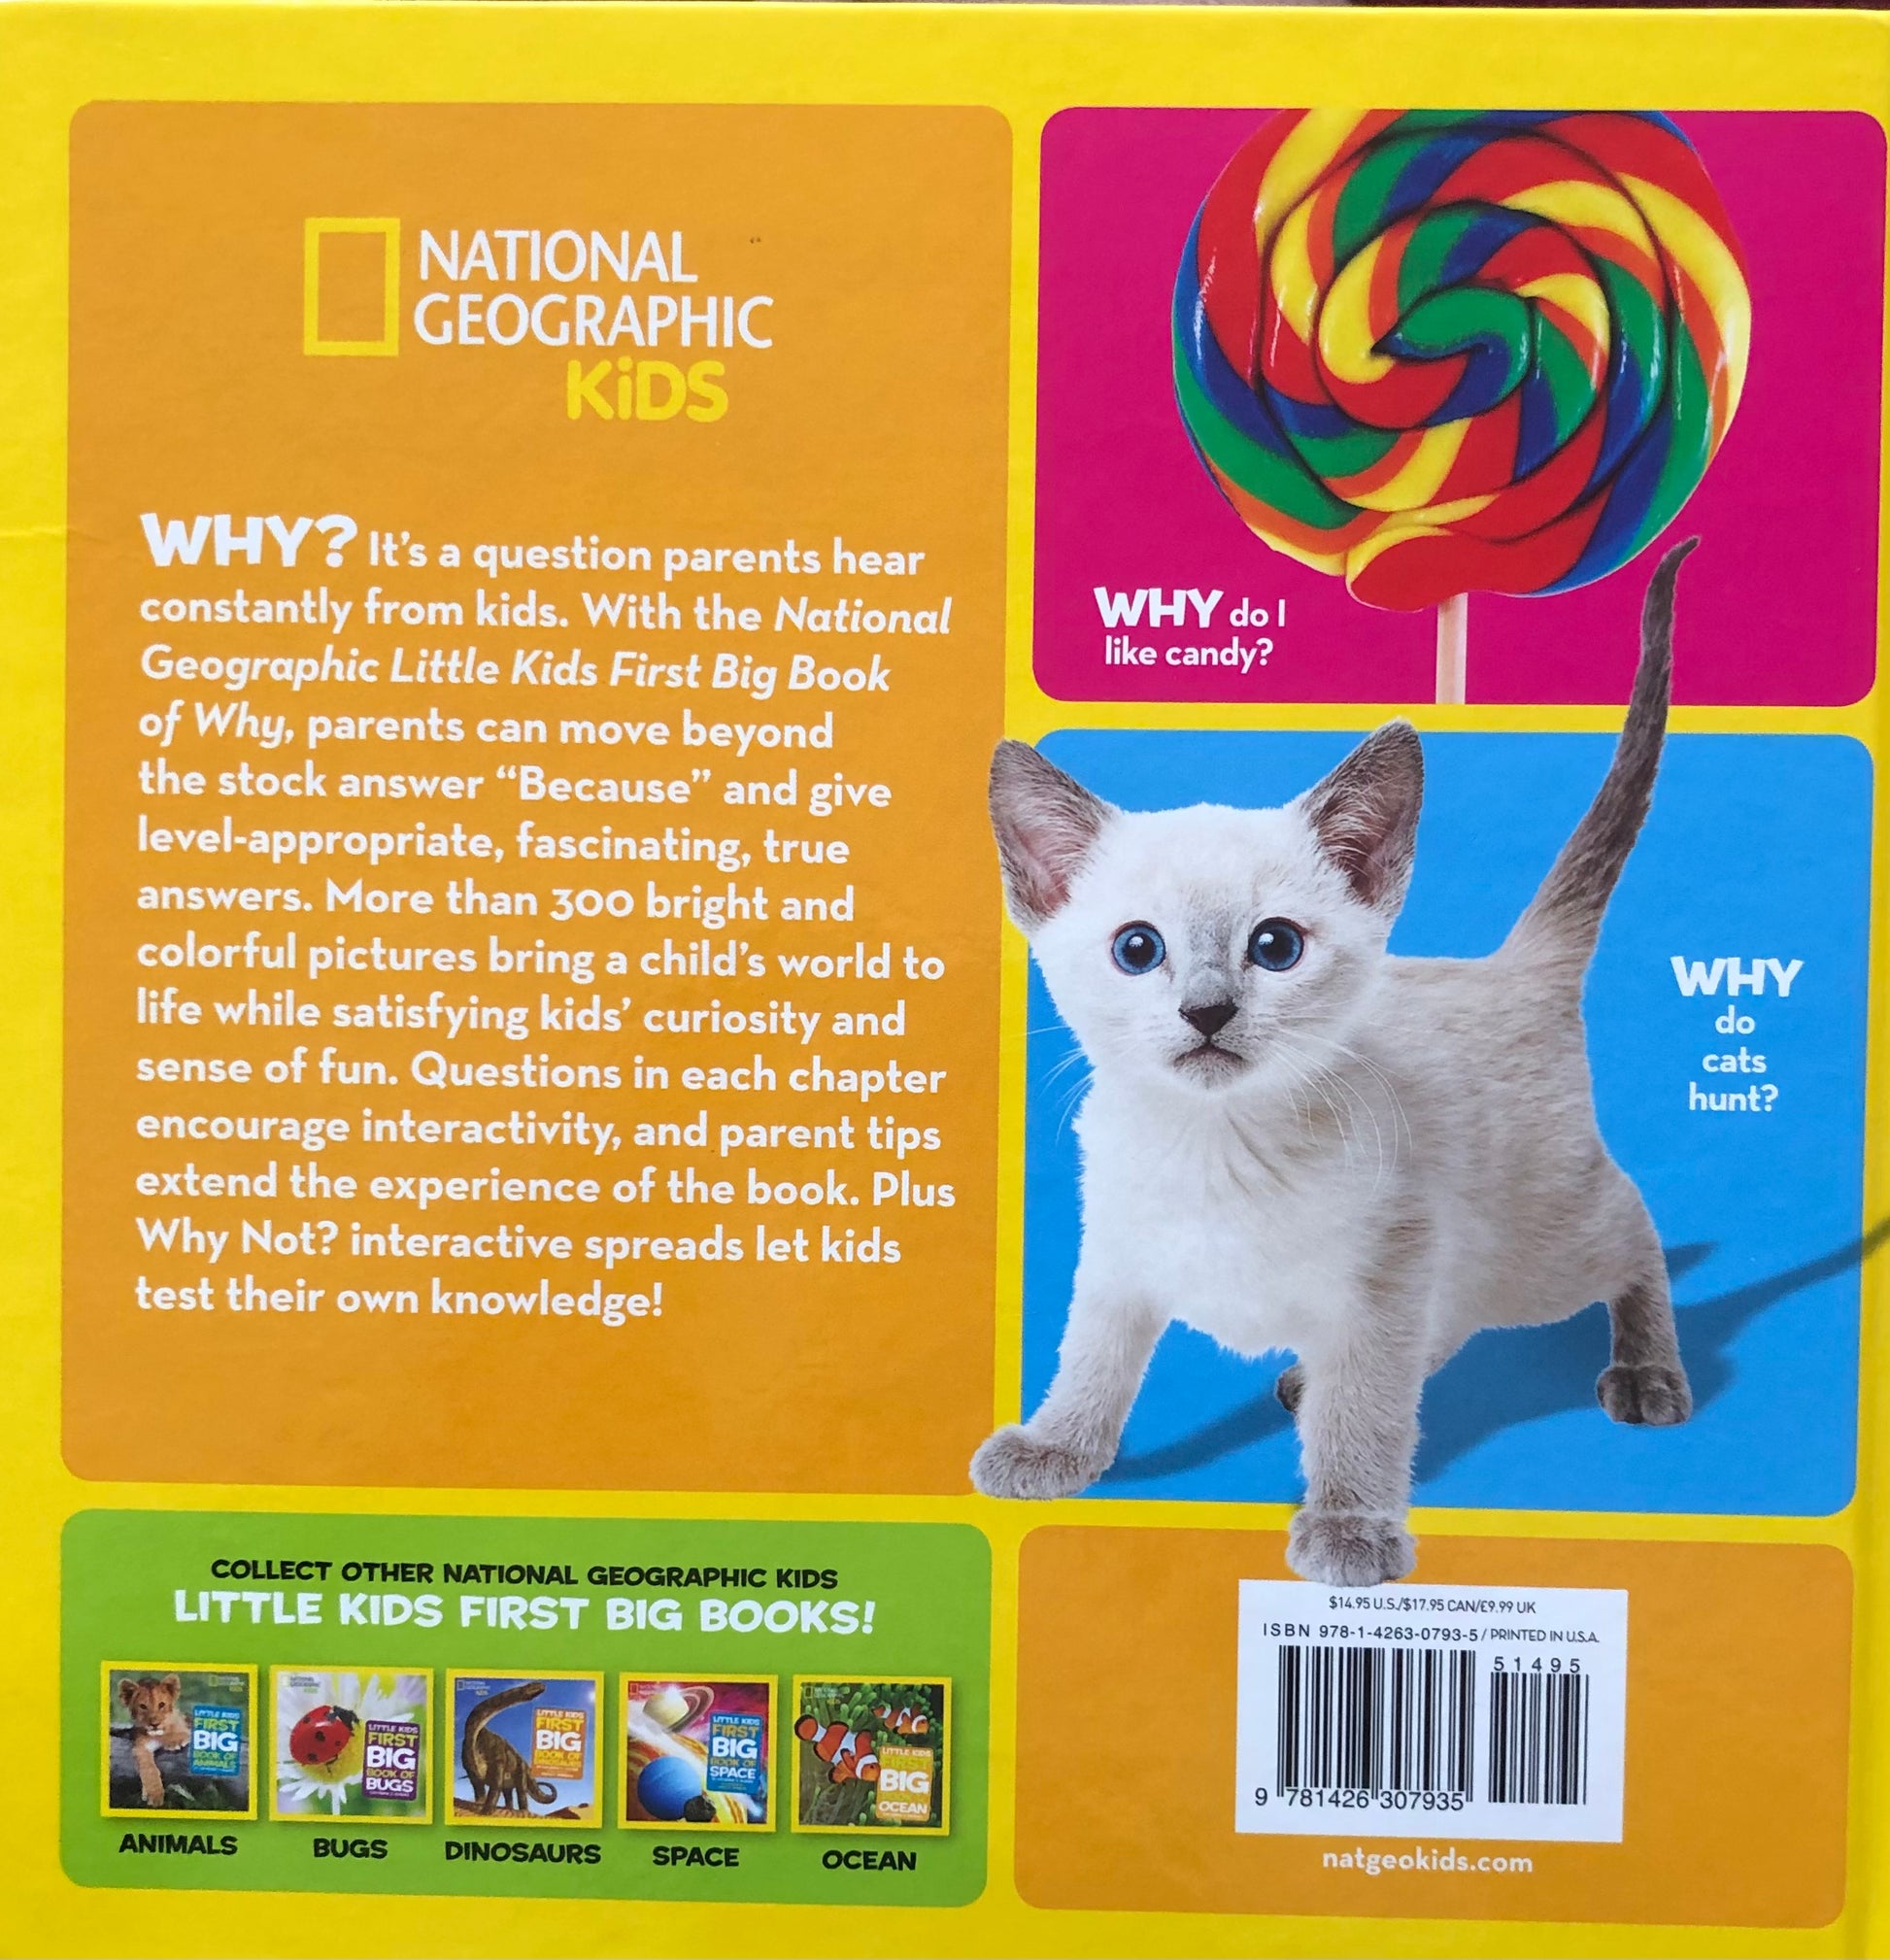 National Geographic Kids Collection - Paperback - (1 each of all